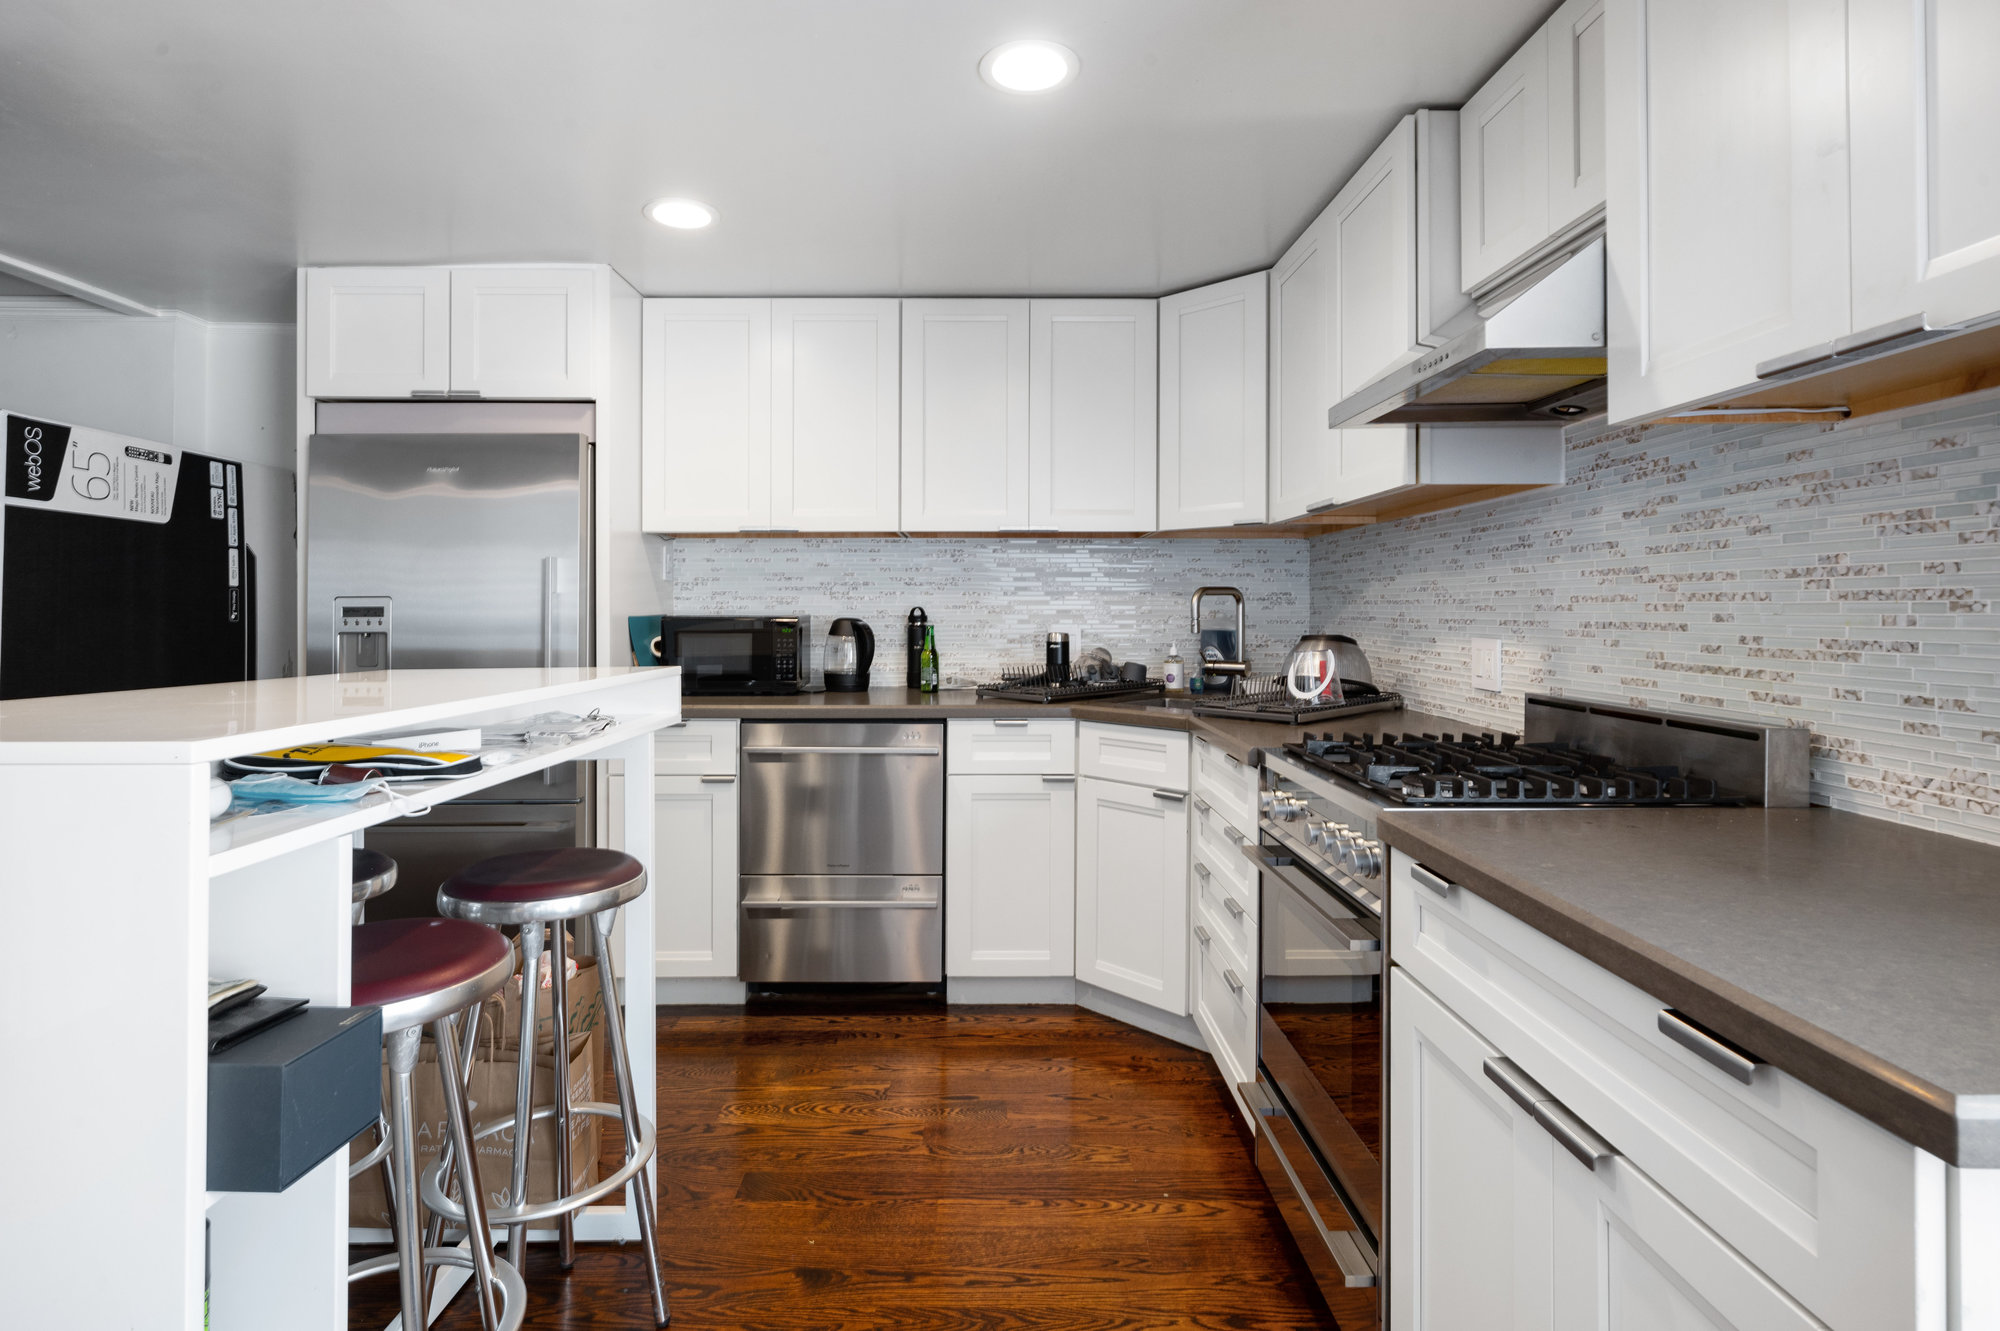 Property Photo: Primary cooking area, featuring white cabinets and stainless steel appliances